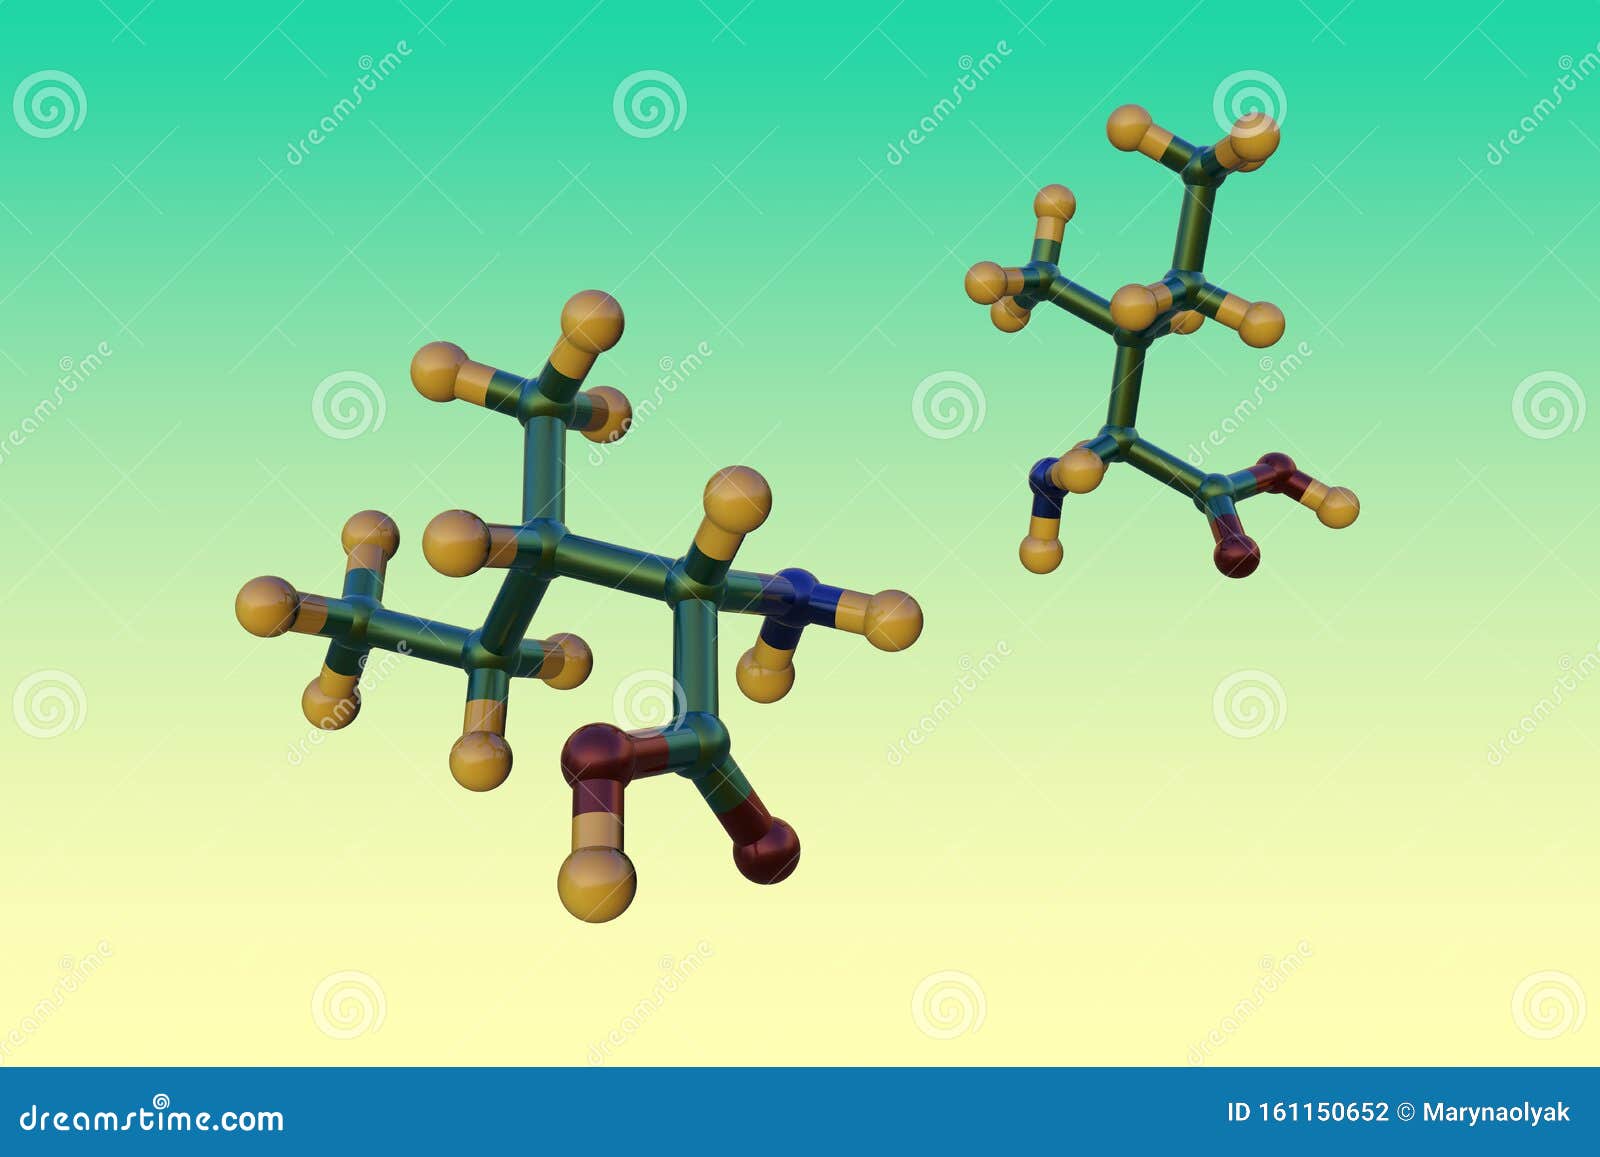 space-filling molecular model of l-isoleucine or isoleucine, an amino acid used in the biosynthesis of proteins